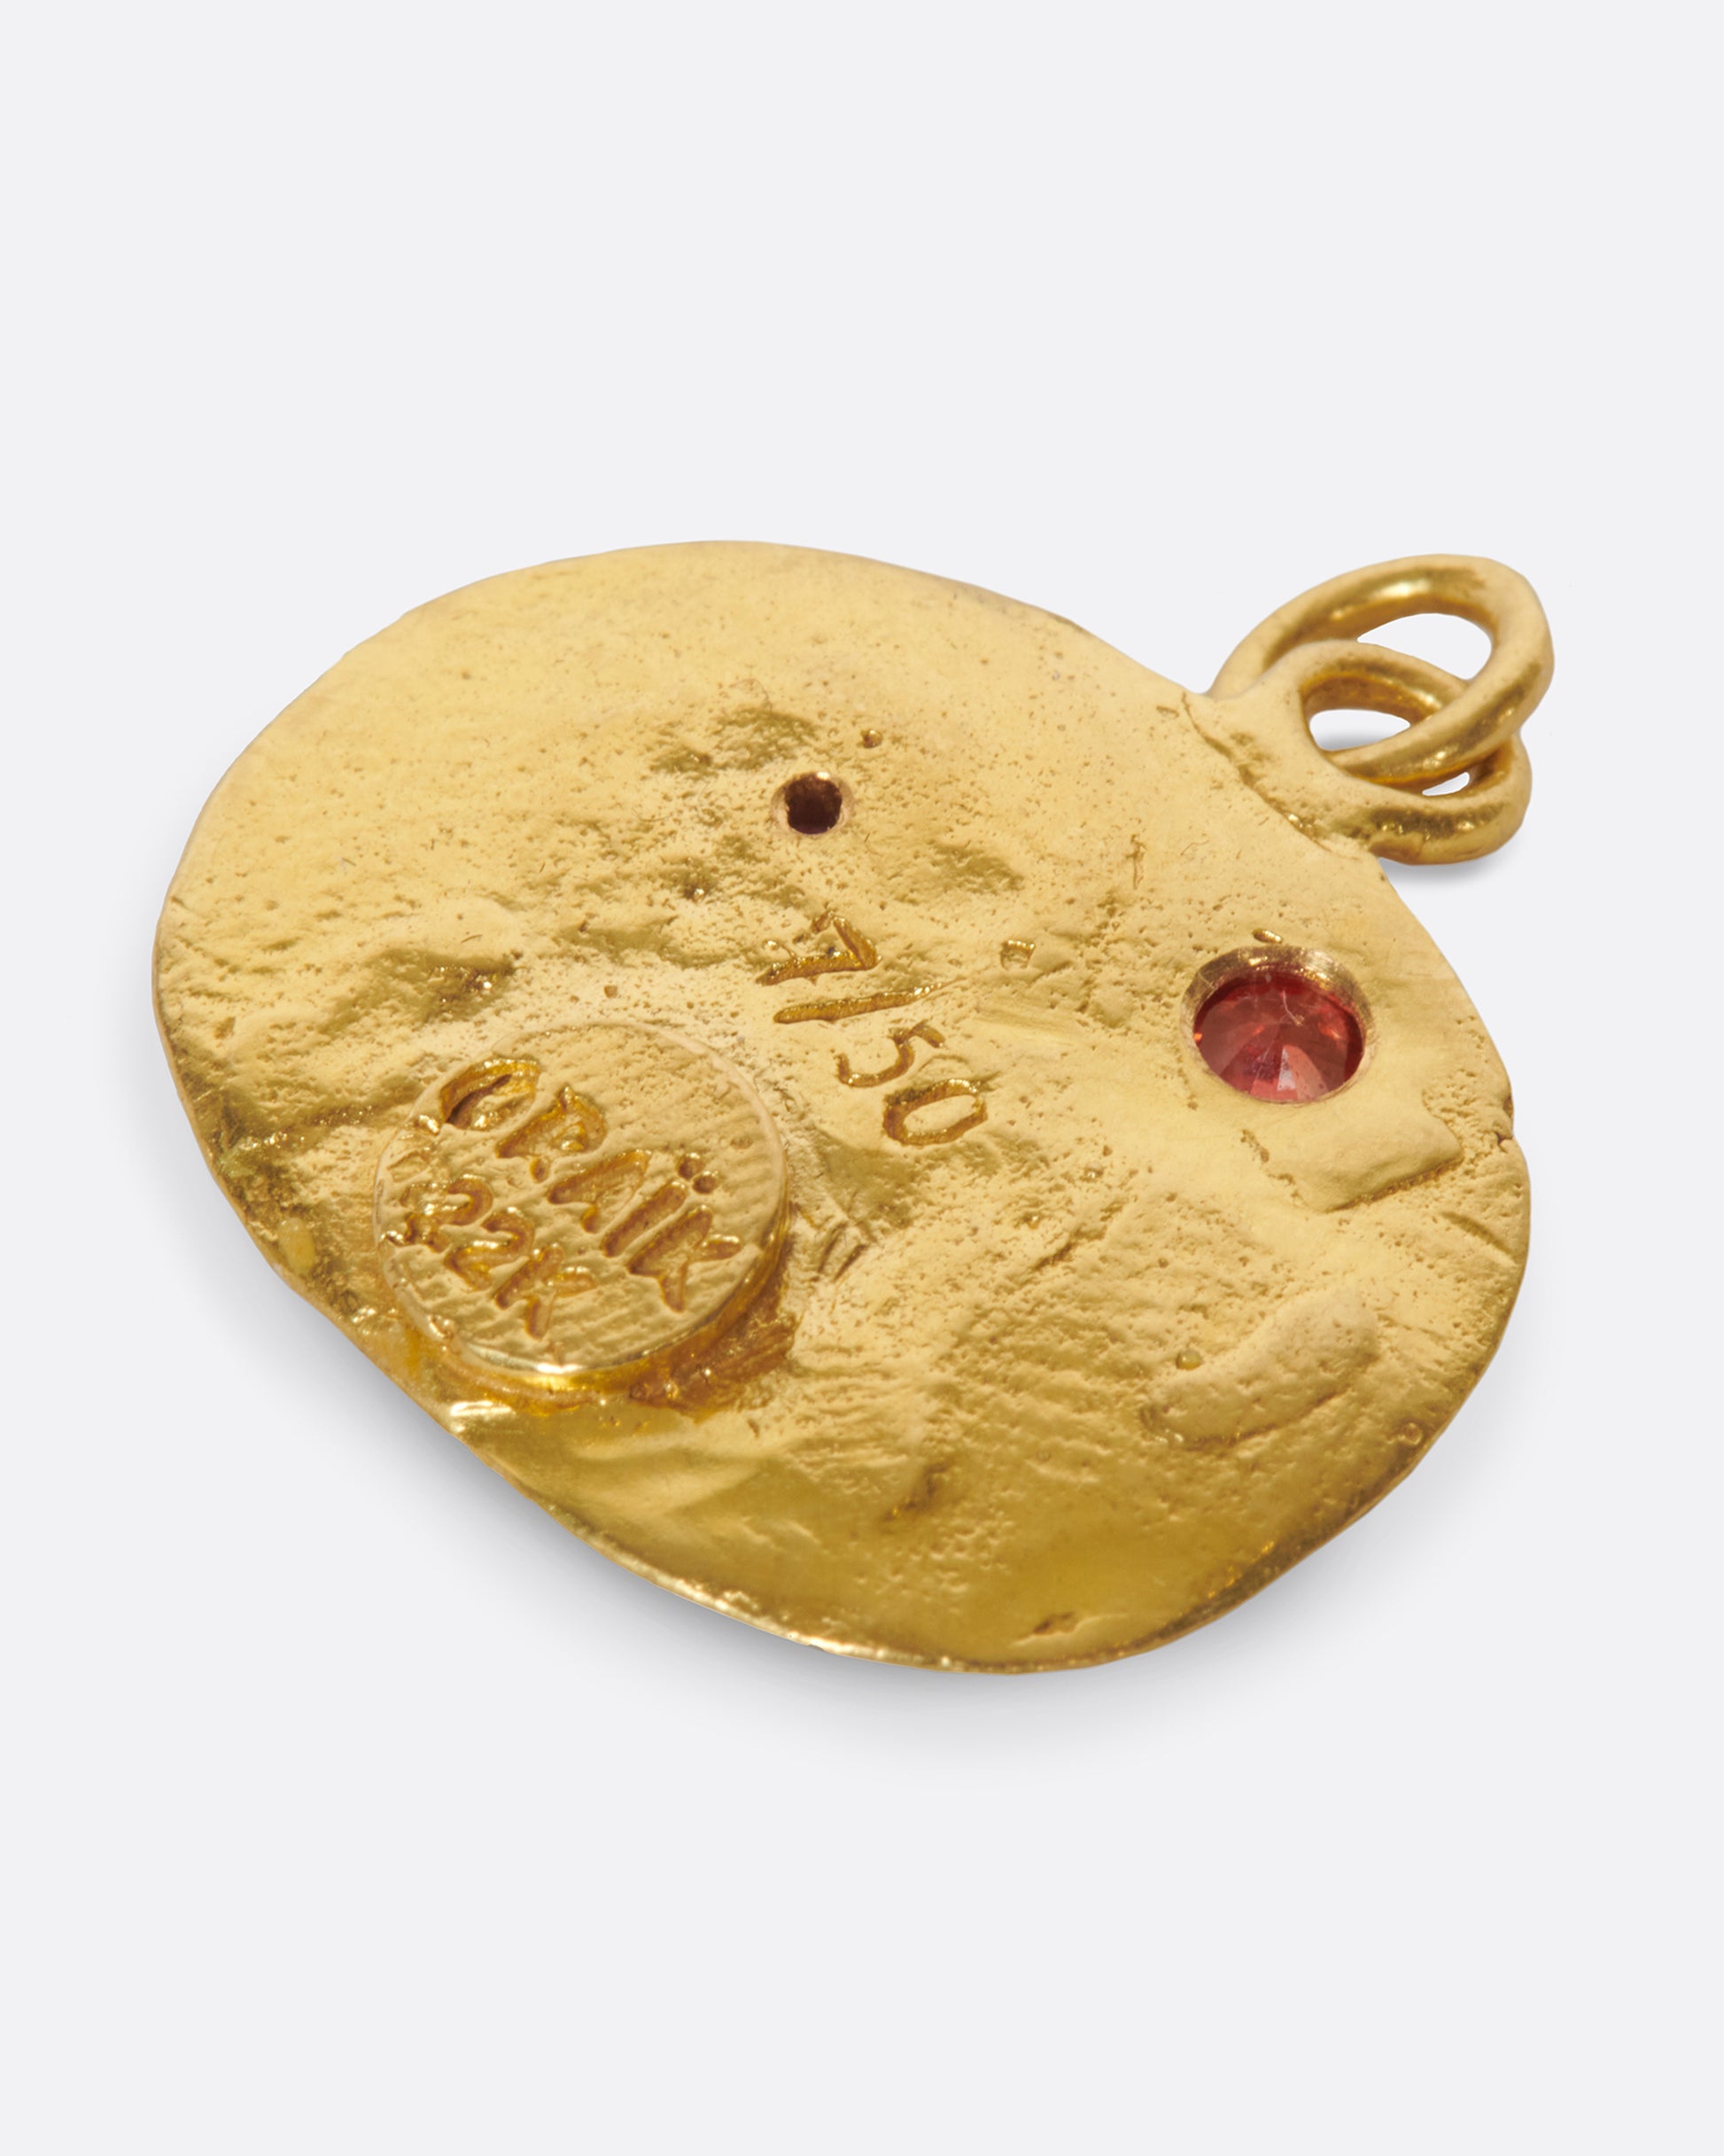 A high karat gold medallion with a hand-sculpted Leo icon with ruby eyes.